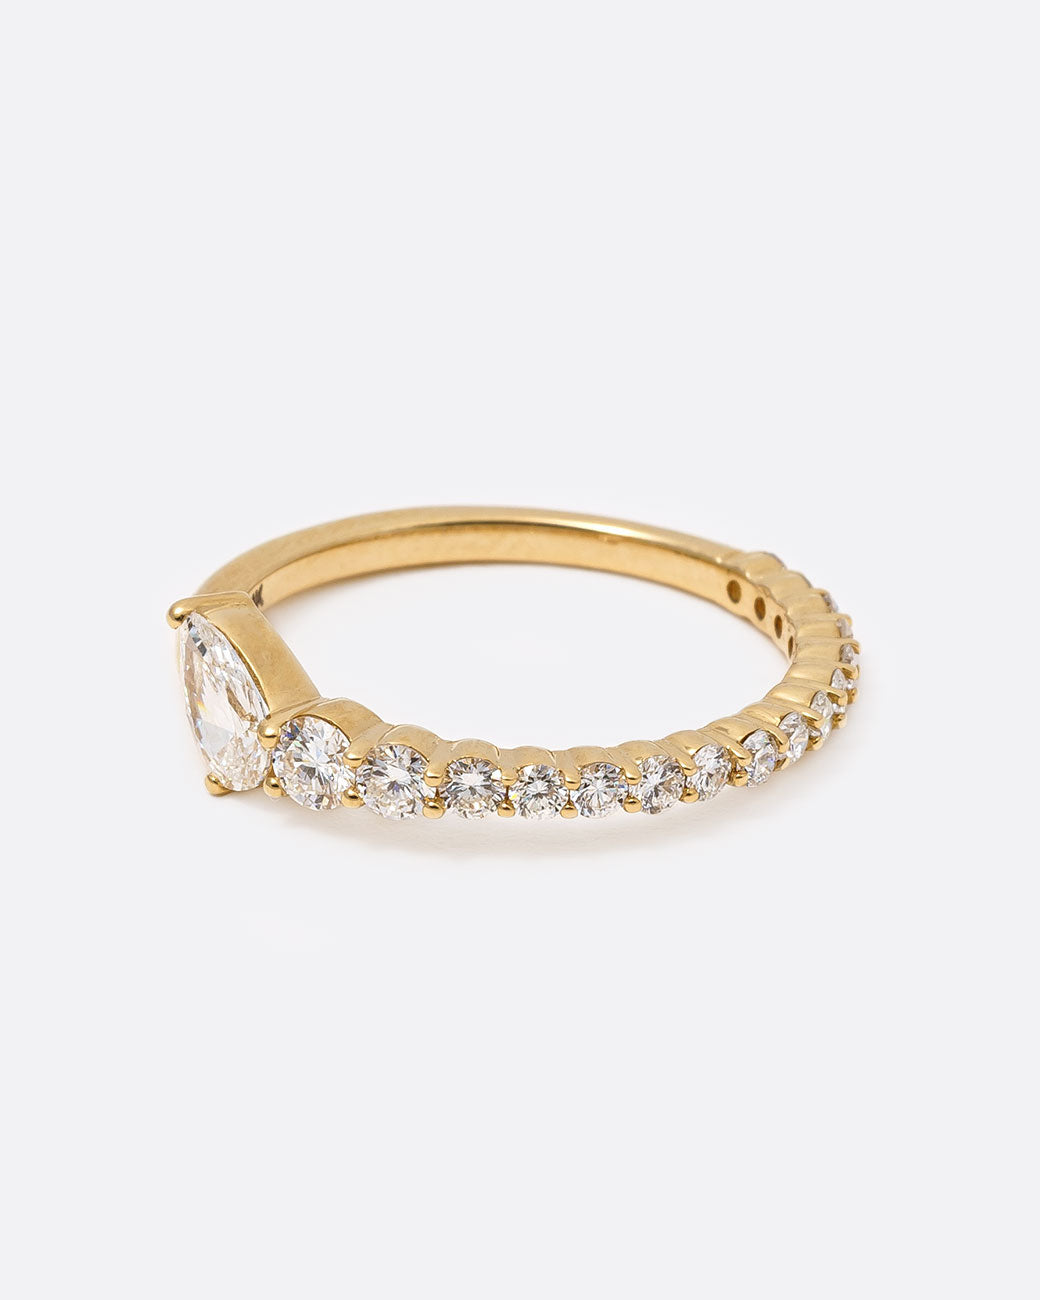 14k yellow gold ring with graduated white diamonds halfway around and one pear shaped white diamond by Selin Kent, from the side.